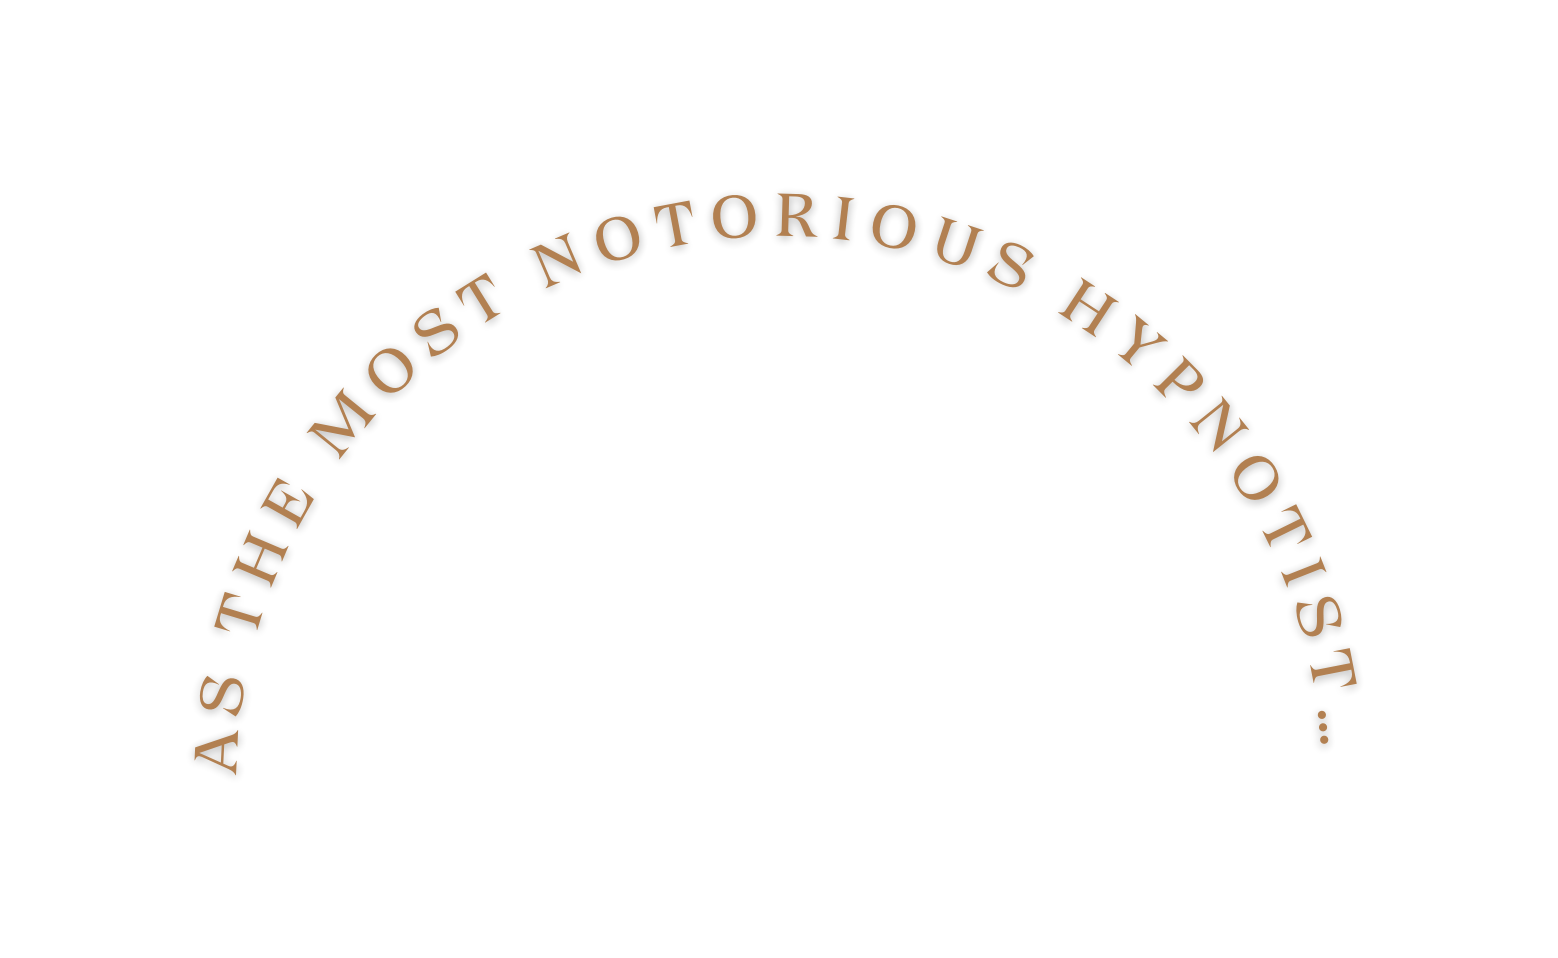 as the most notorious hypnotist